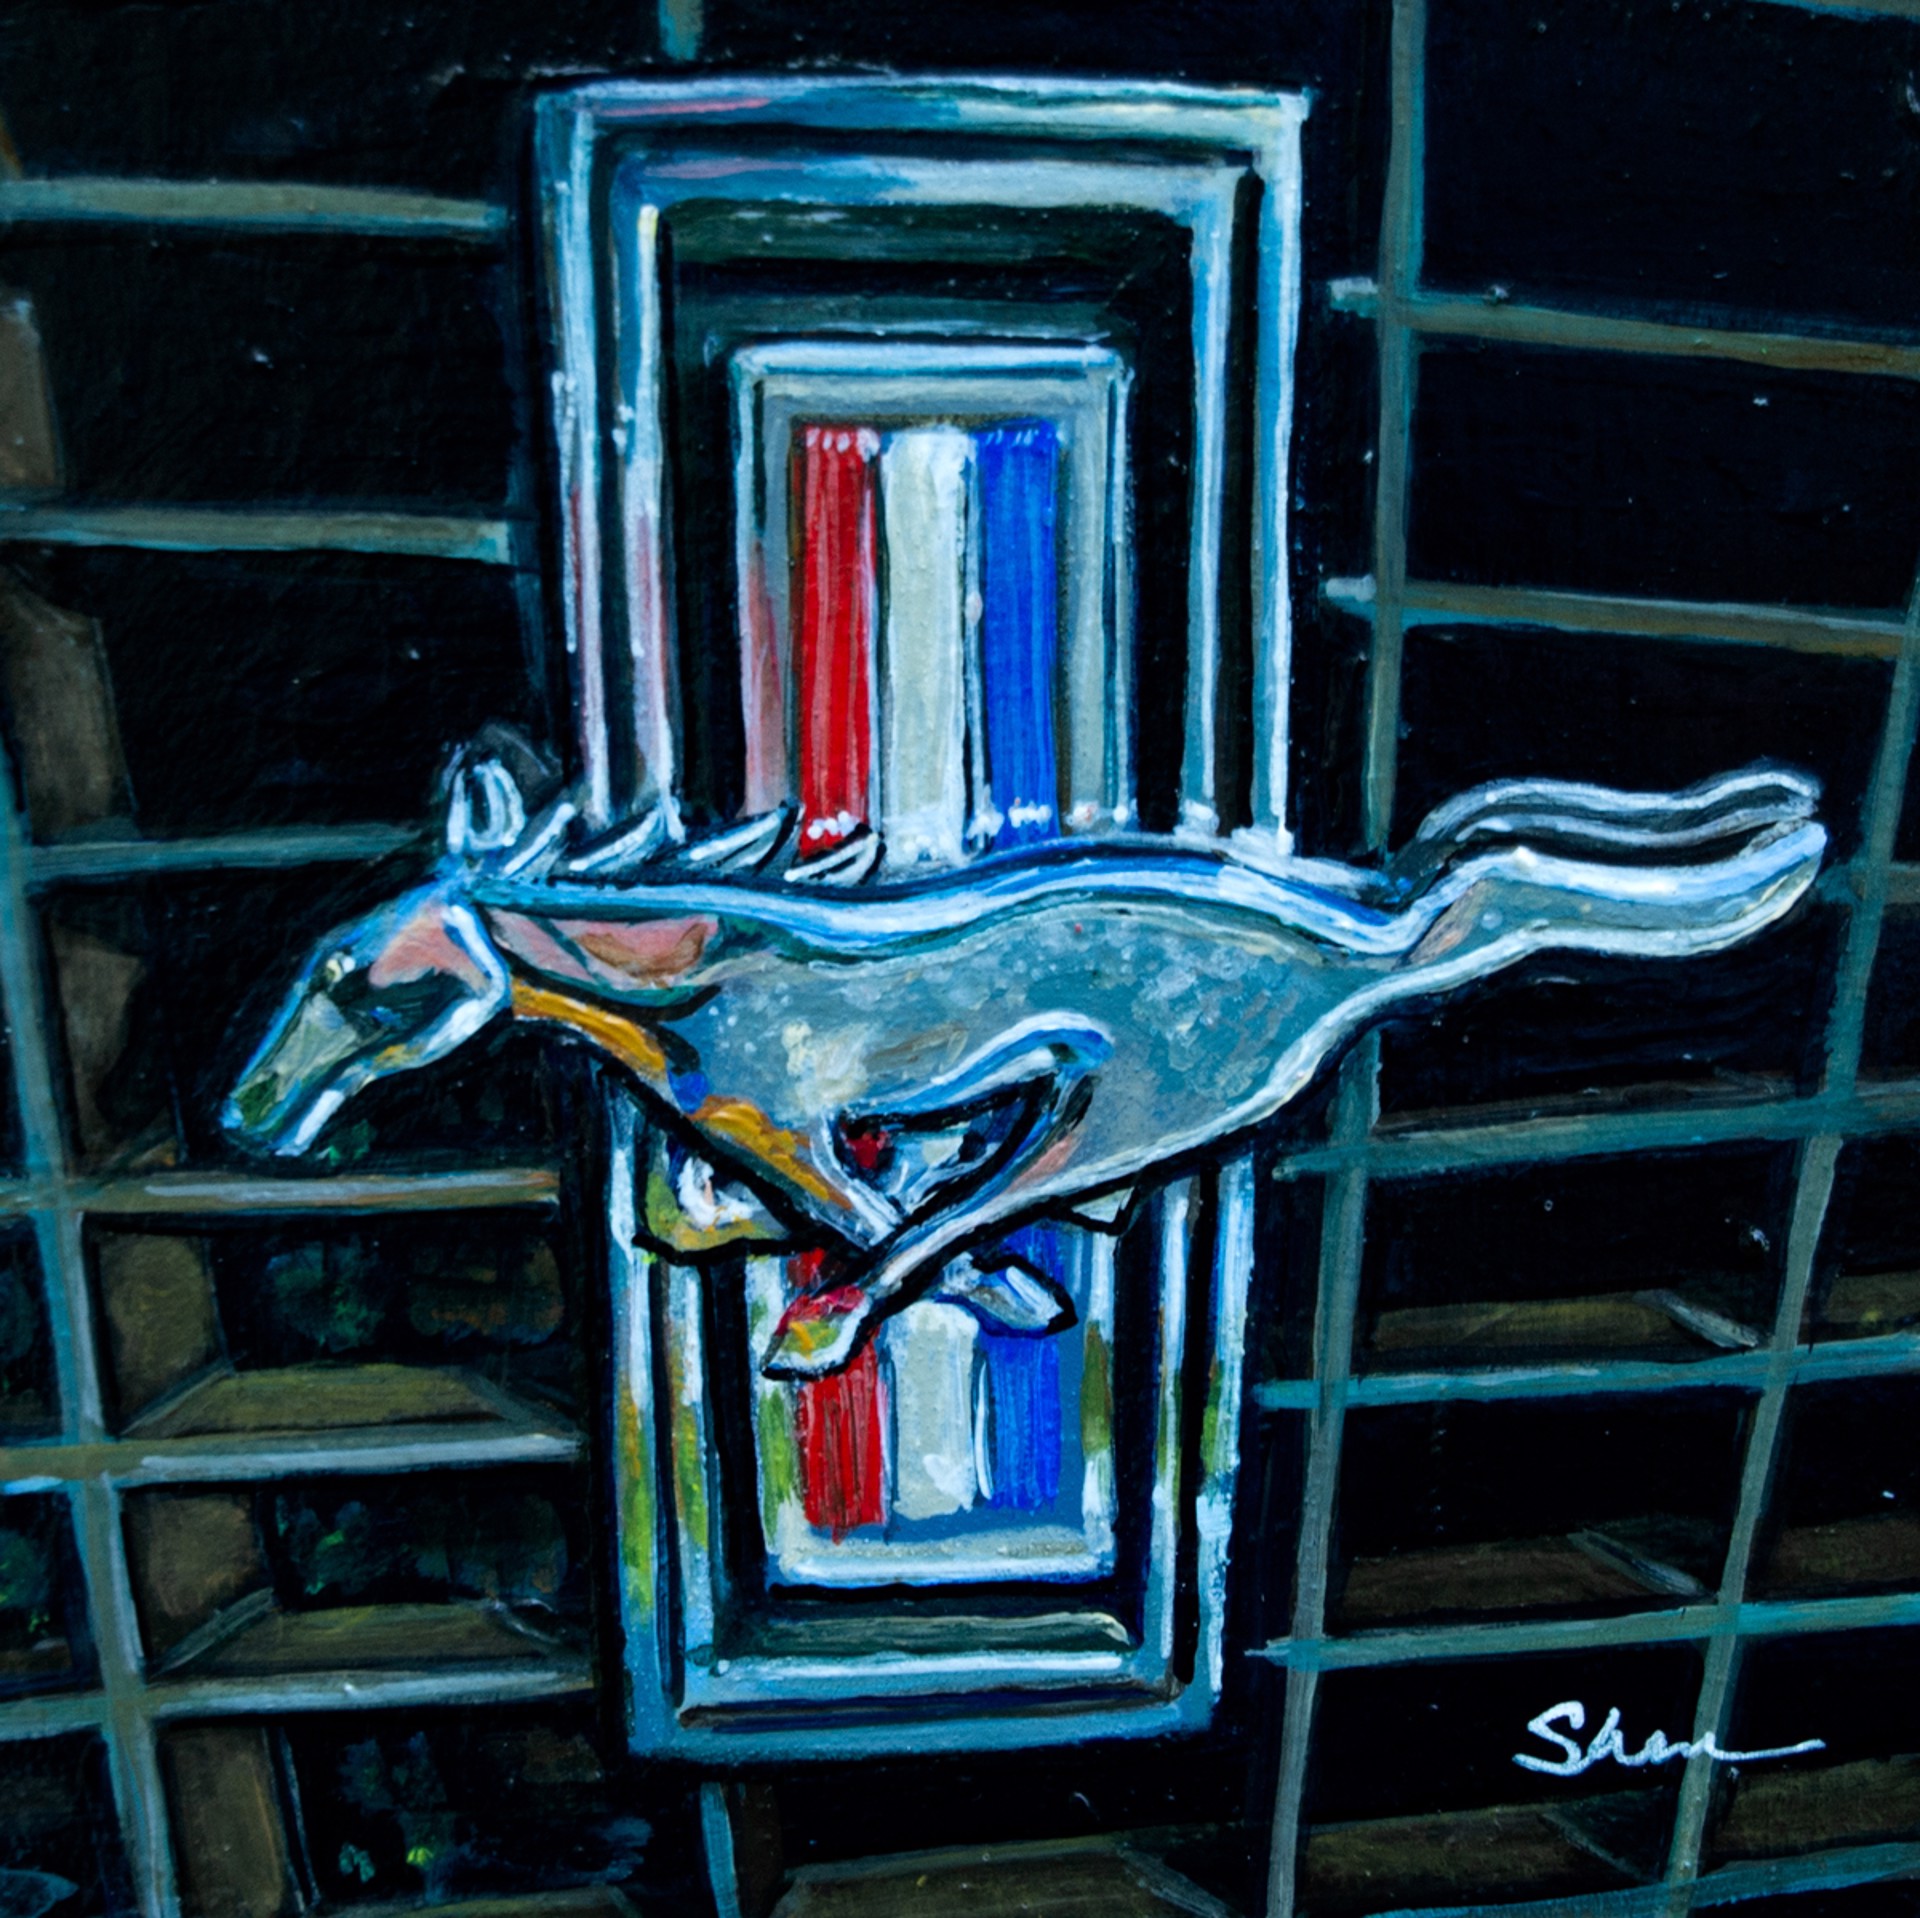 Pony Power - Ford Mustang Emblem by Shan Fannin